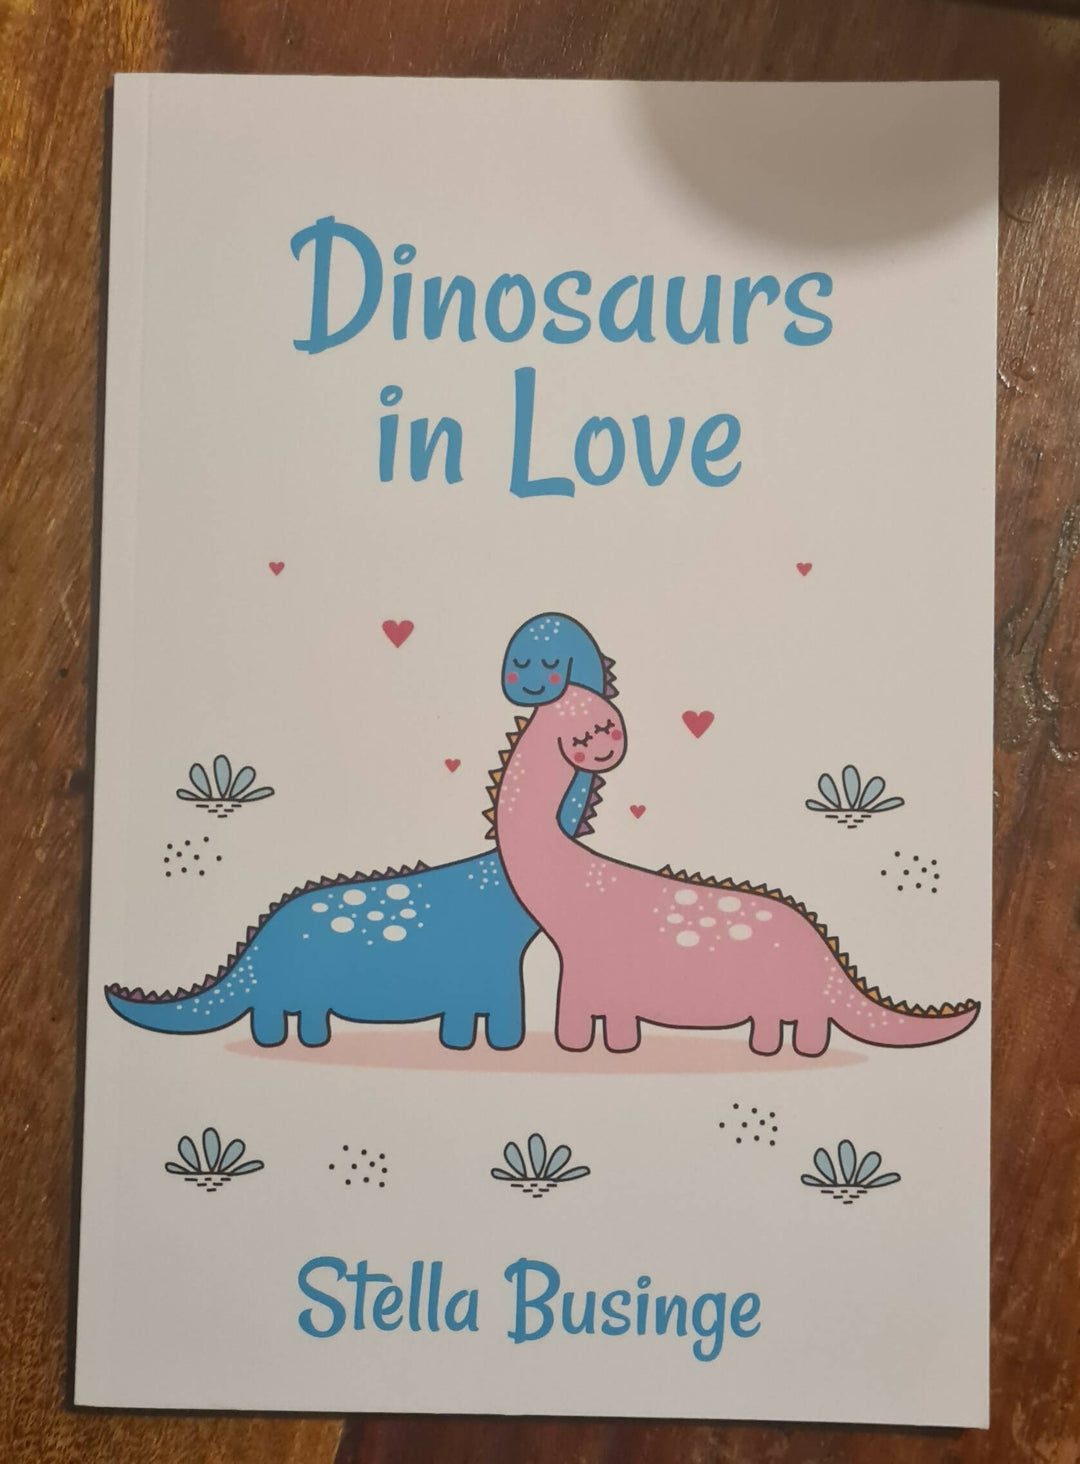 Dinosaurs in Love Kids story book